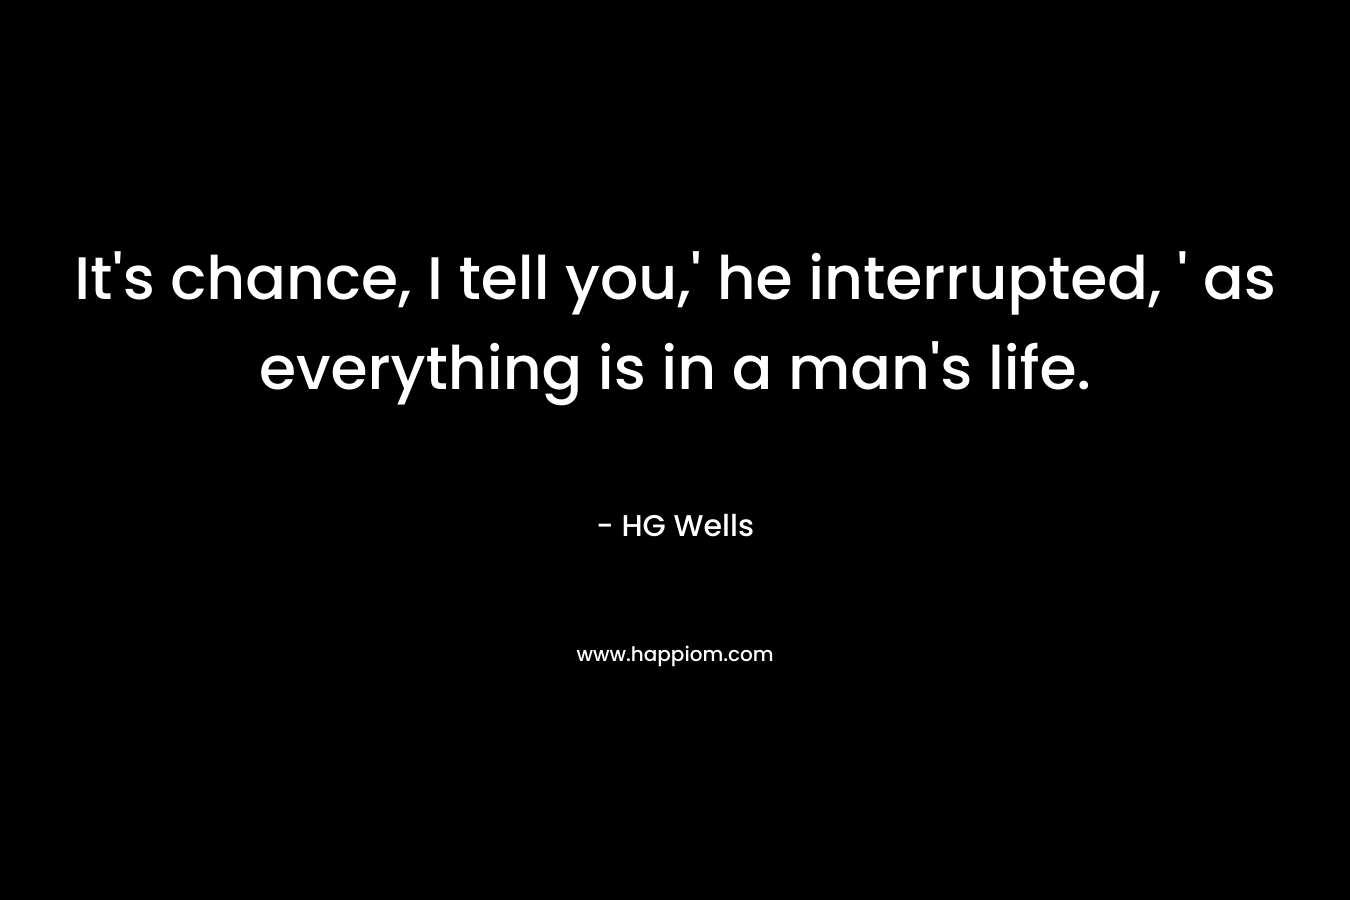 It's chance, I tell you,' he interrupted, ' as everything is in a man's life.